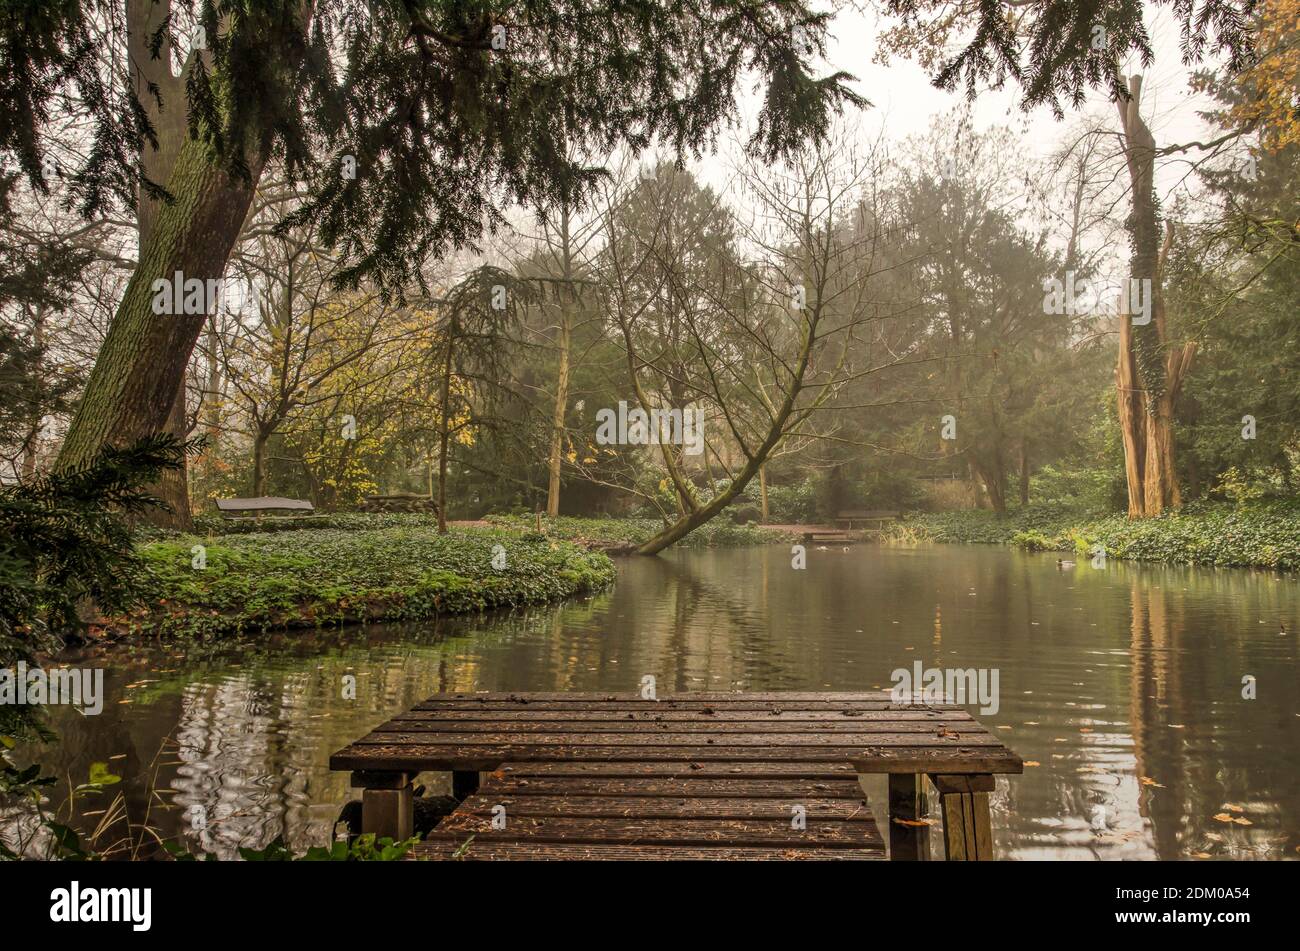 A wooden jetty and a pond surrounded by trees in historic Schoonoord park in Rotterdam, The Netherlands on a hazy day in late autumn Stock Photo